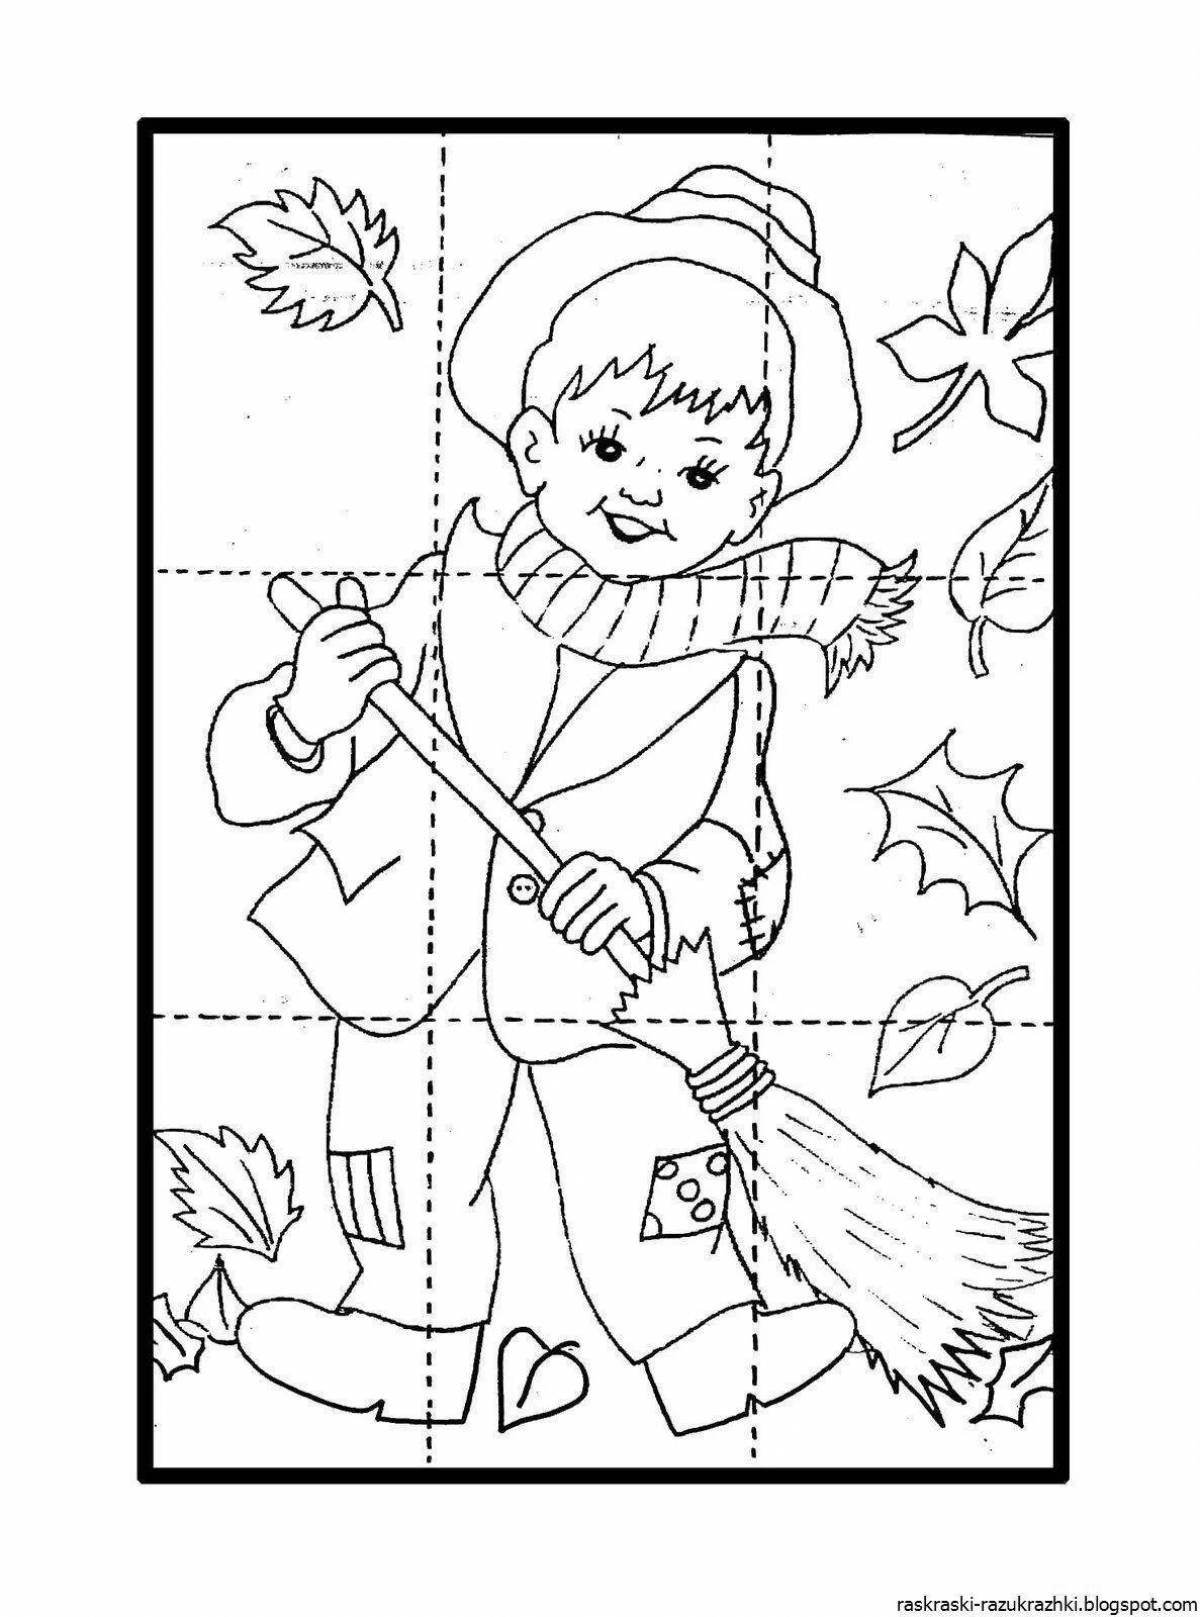 Fun puzzle coloring book for kids